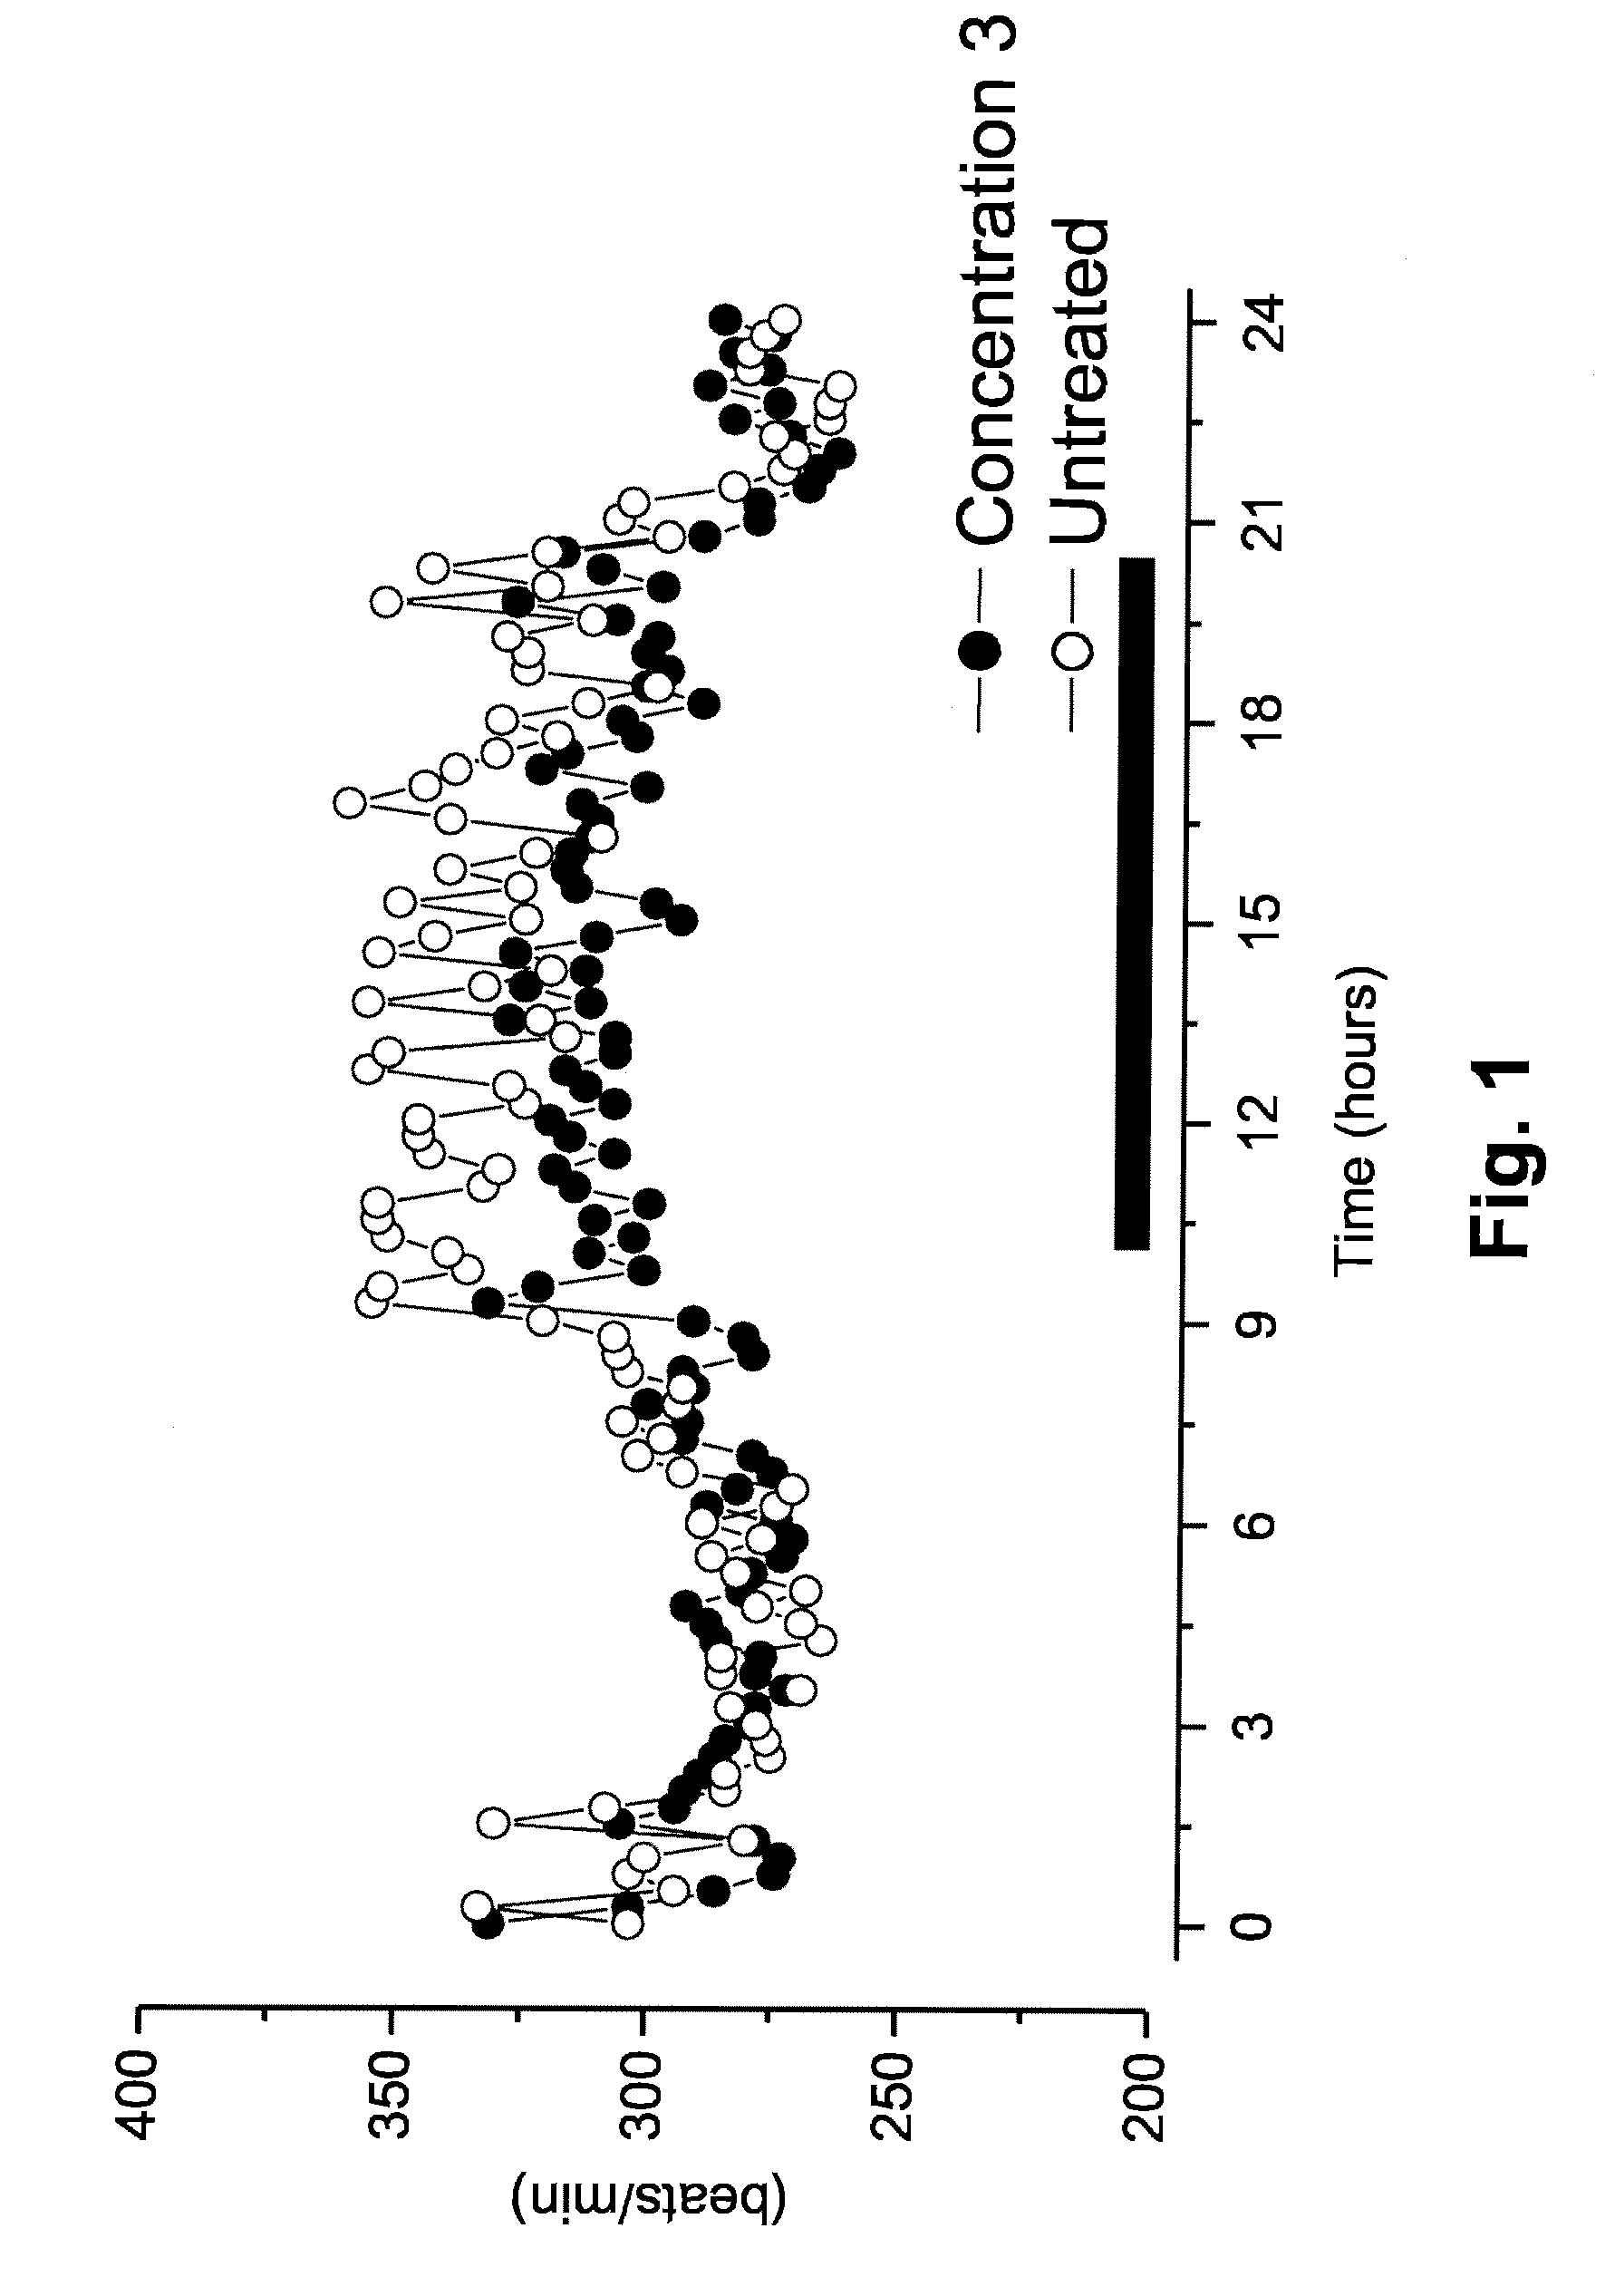 Fermented milk or vegetable proteins comprising receptor ligand and uses thereof